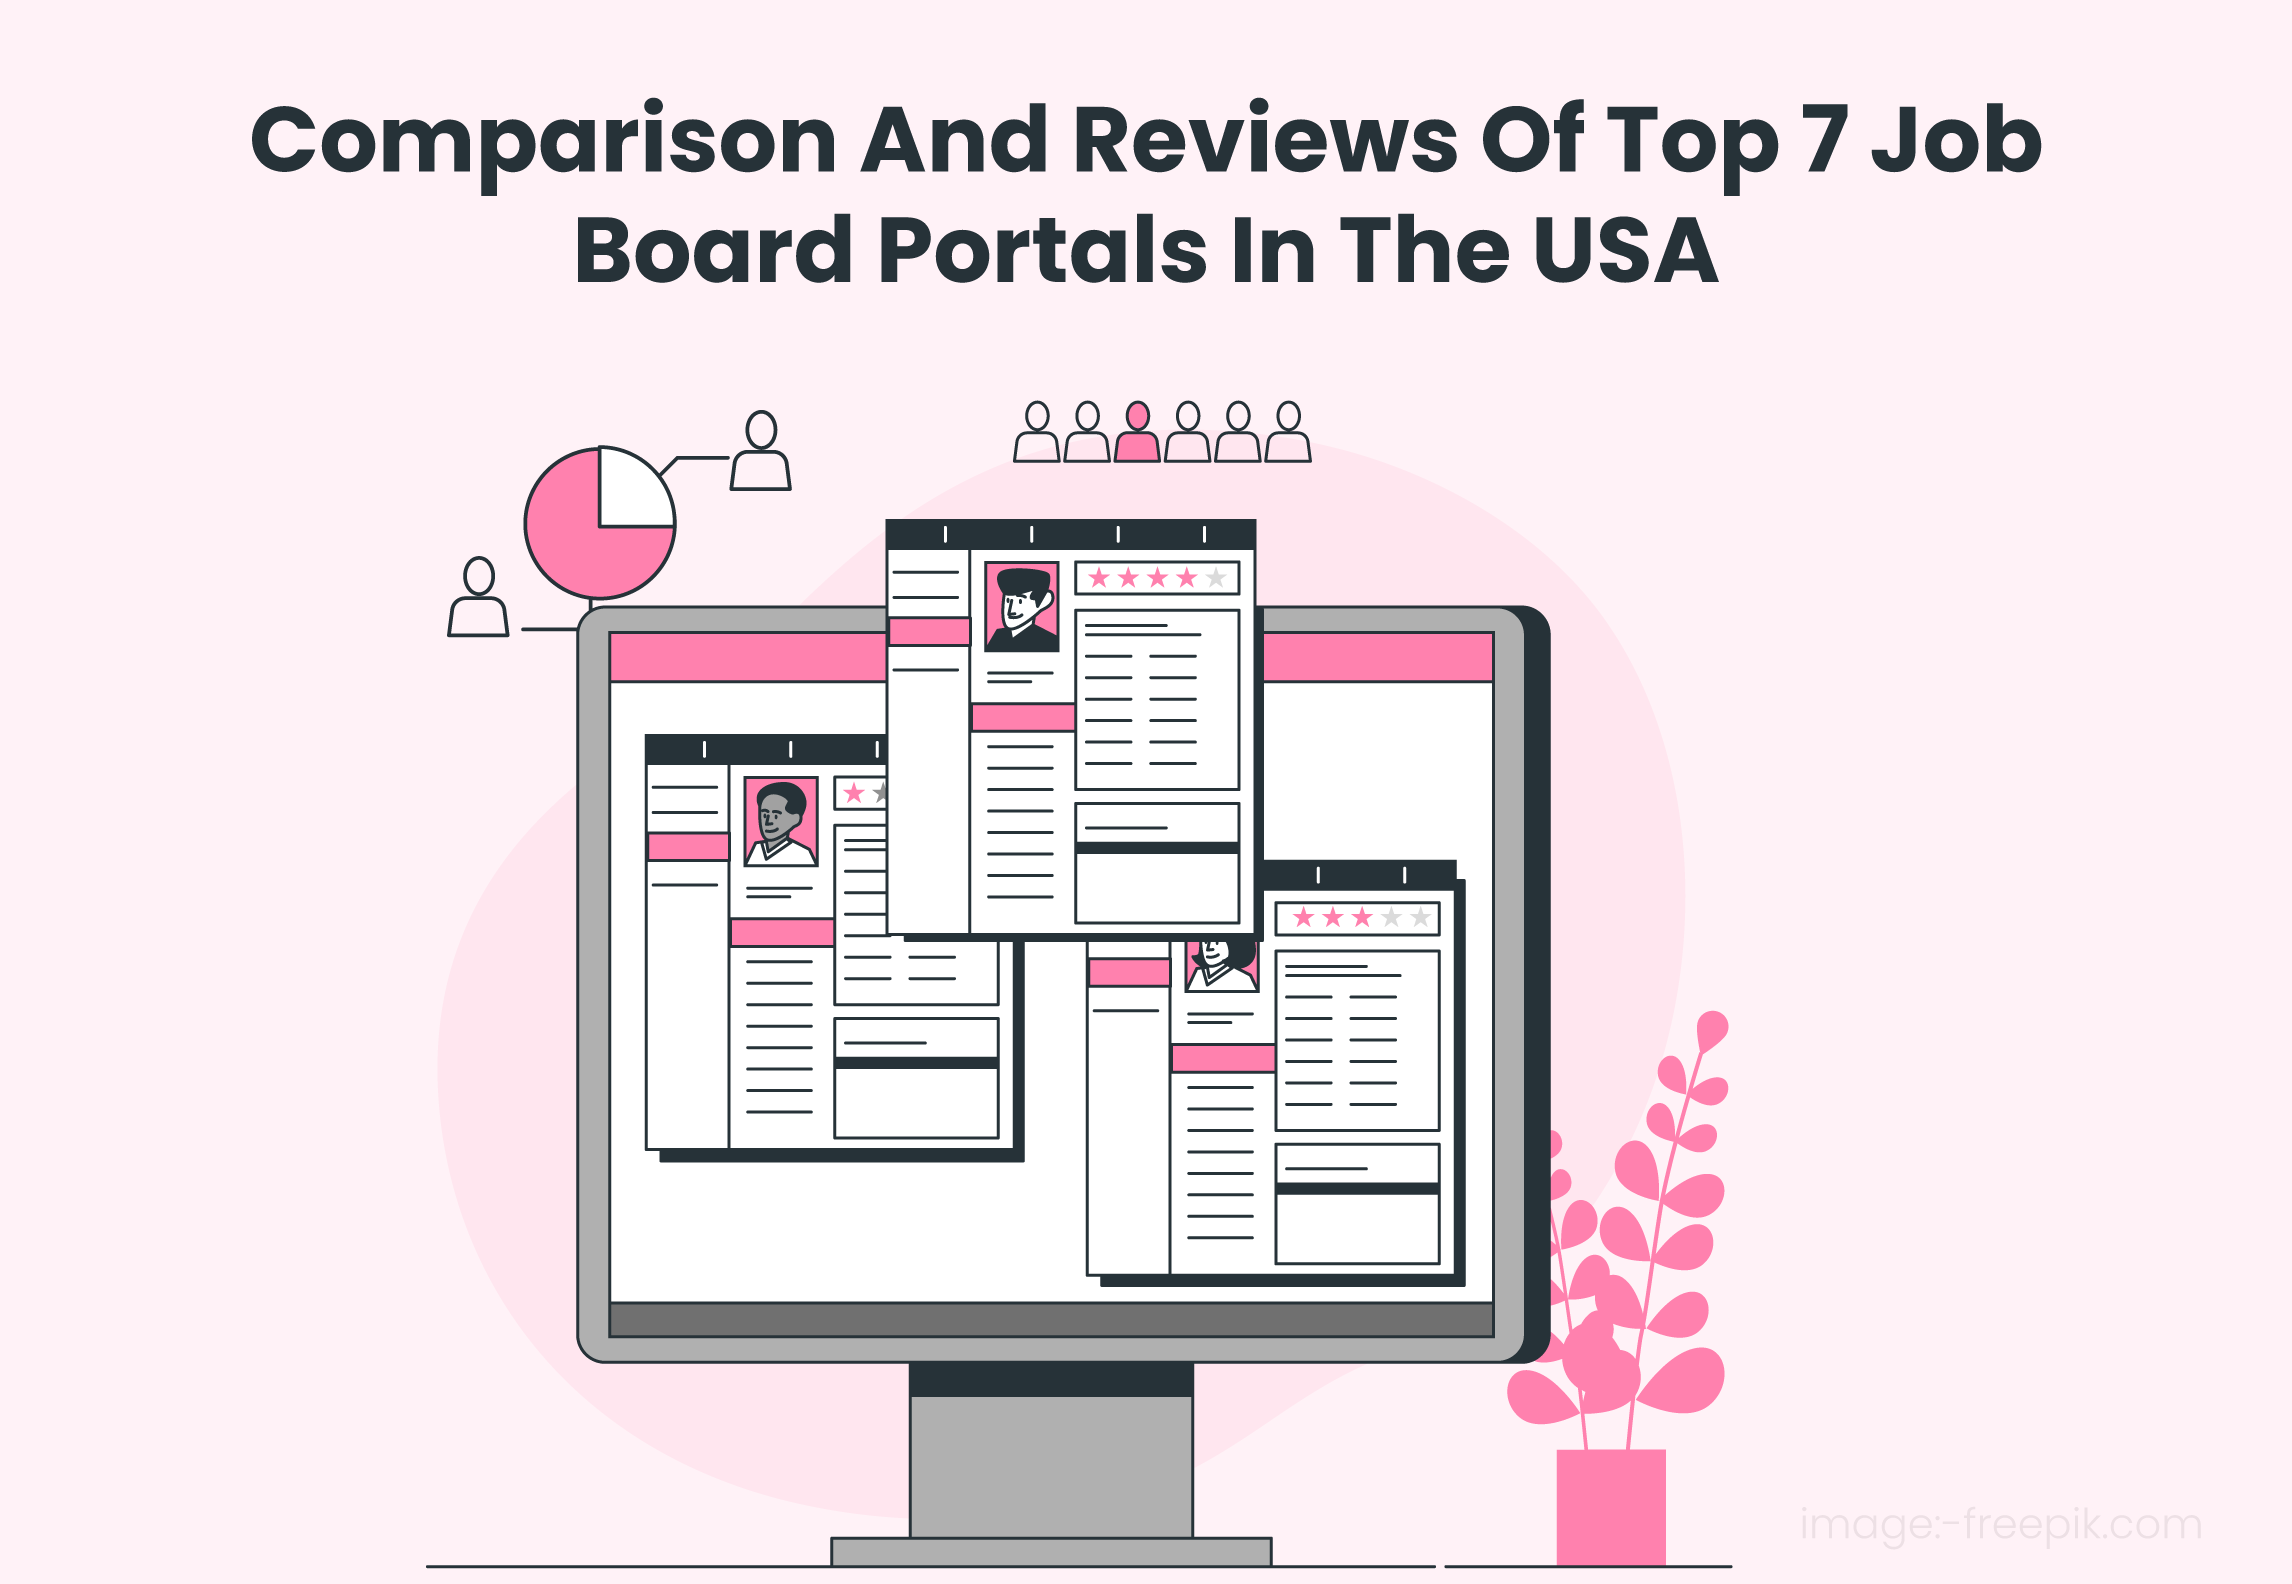 Comparison And Reviews Of Top 7 Job Board Portals In The USA